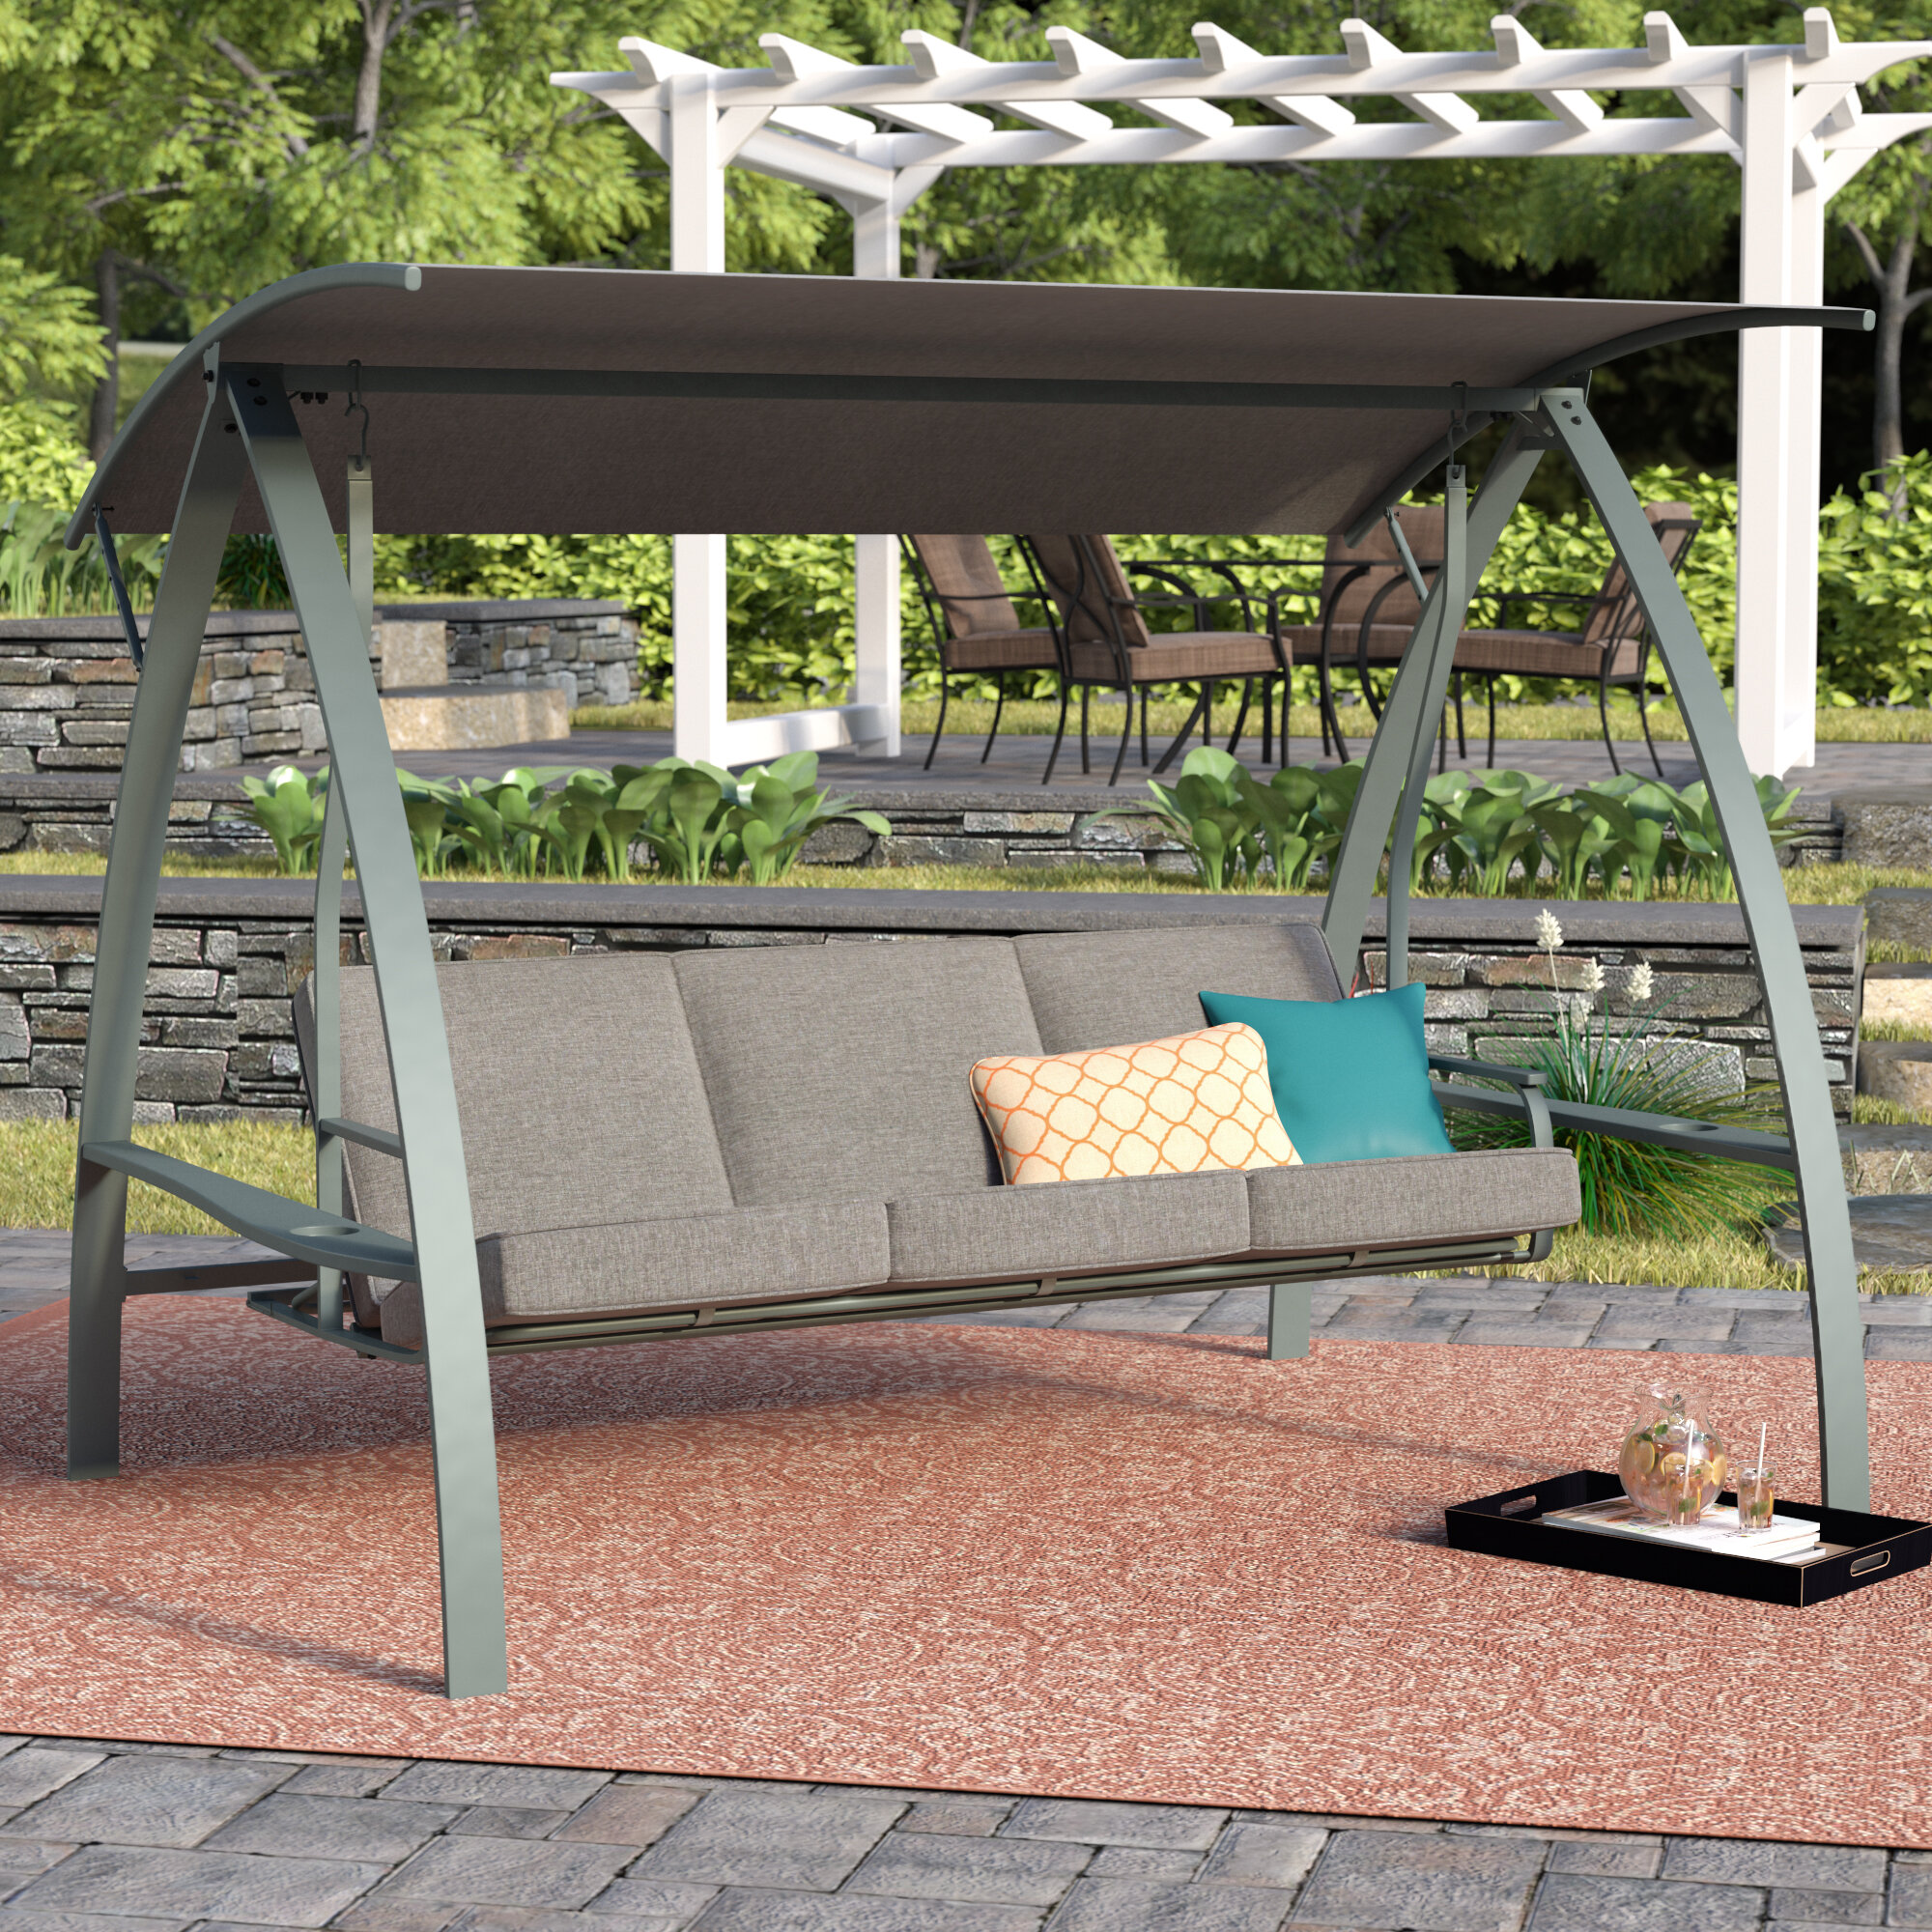 Marquette Canopy Swing : Marquette 3 Seat Daybed Porch Swing With Stand In 2020 Porch Swing With Stand Porch Swing Porch Swing With Canopy / Don't miss out on spectacular savings on patio swings with canopy.